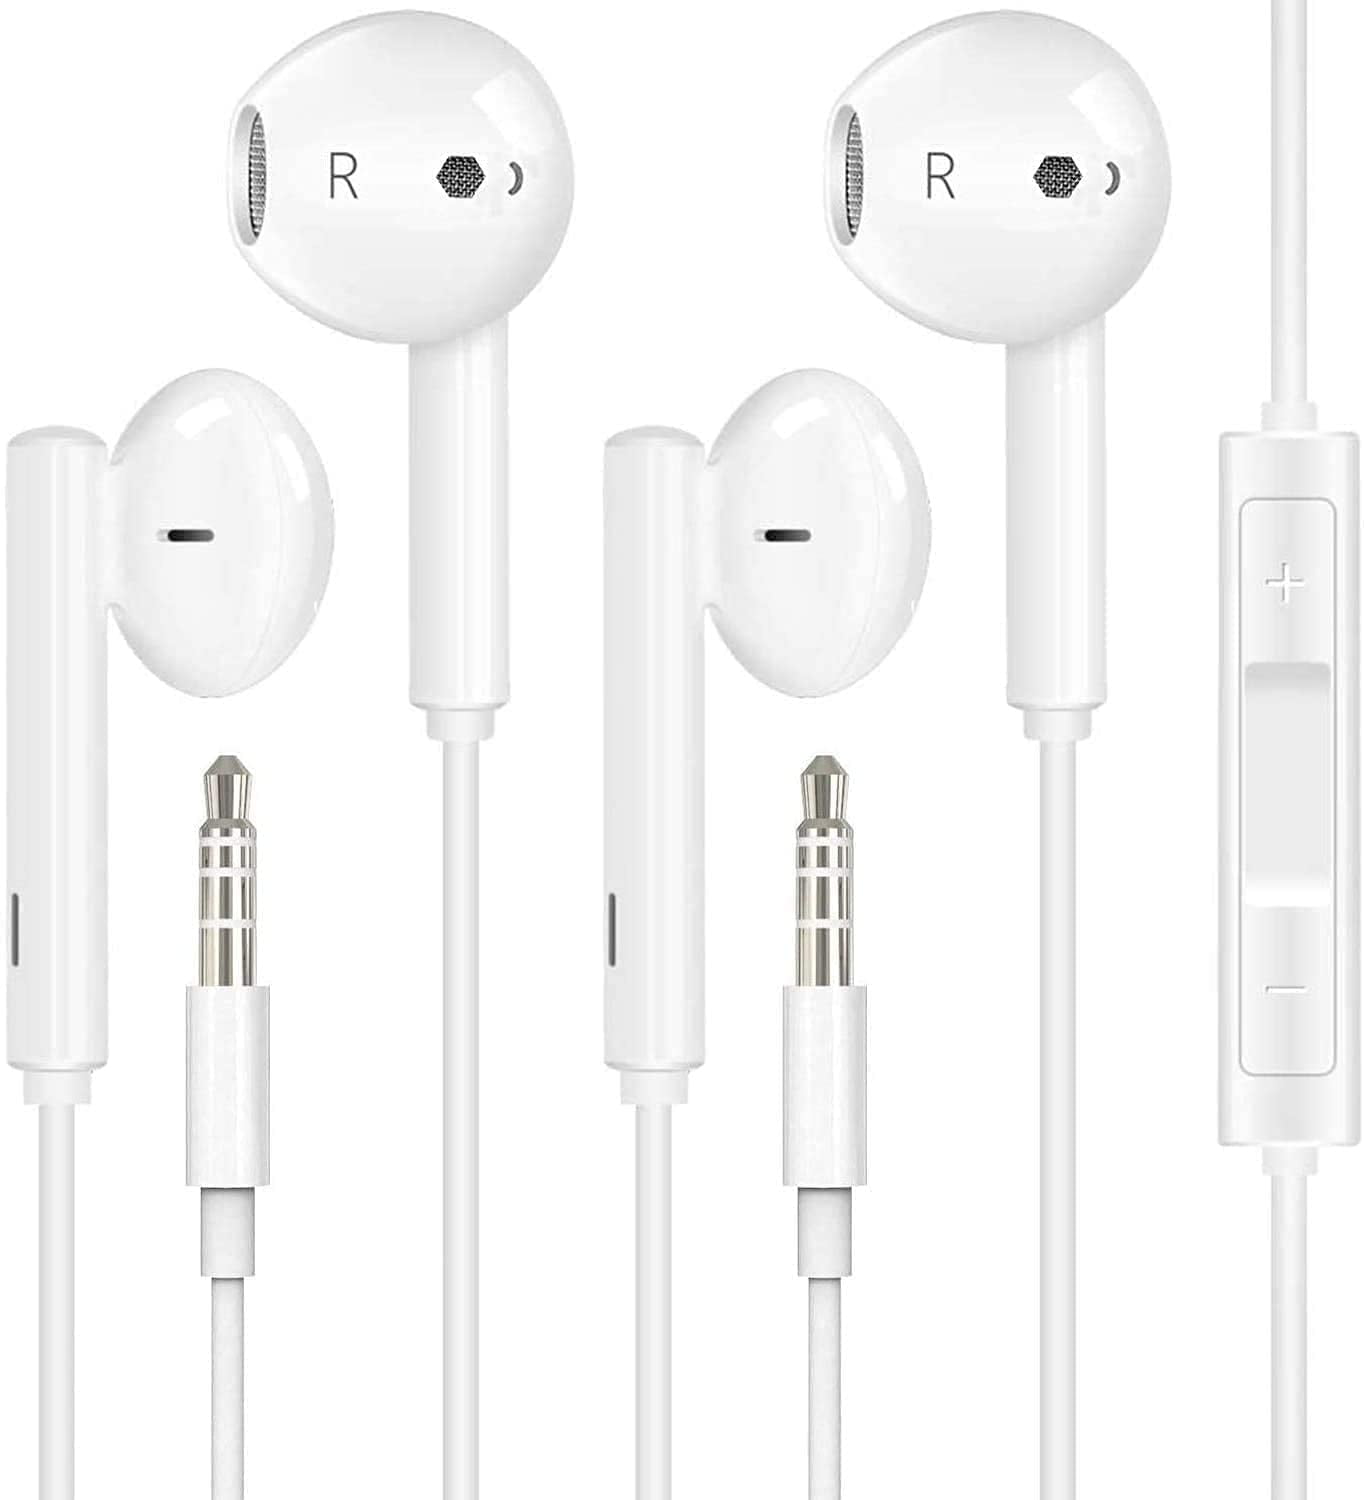 Earphone Earbuds 2 Pack 3.5mm in-Ear Wired Earbuds with Built-in Microphone & Volume Control Compatible with iPhone 6s plus/6/5s/5c/Pad/S10 Android All 3.5 mm Audio Devices Wired Headphones 